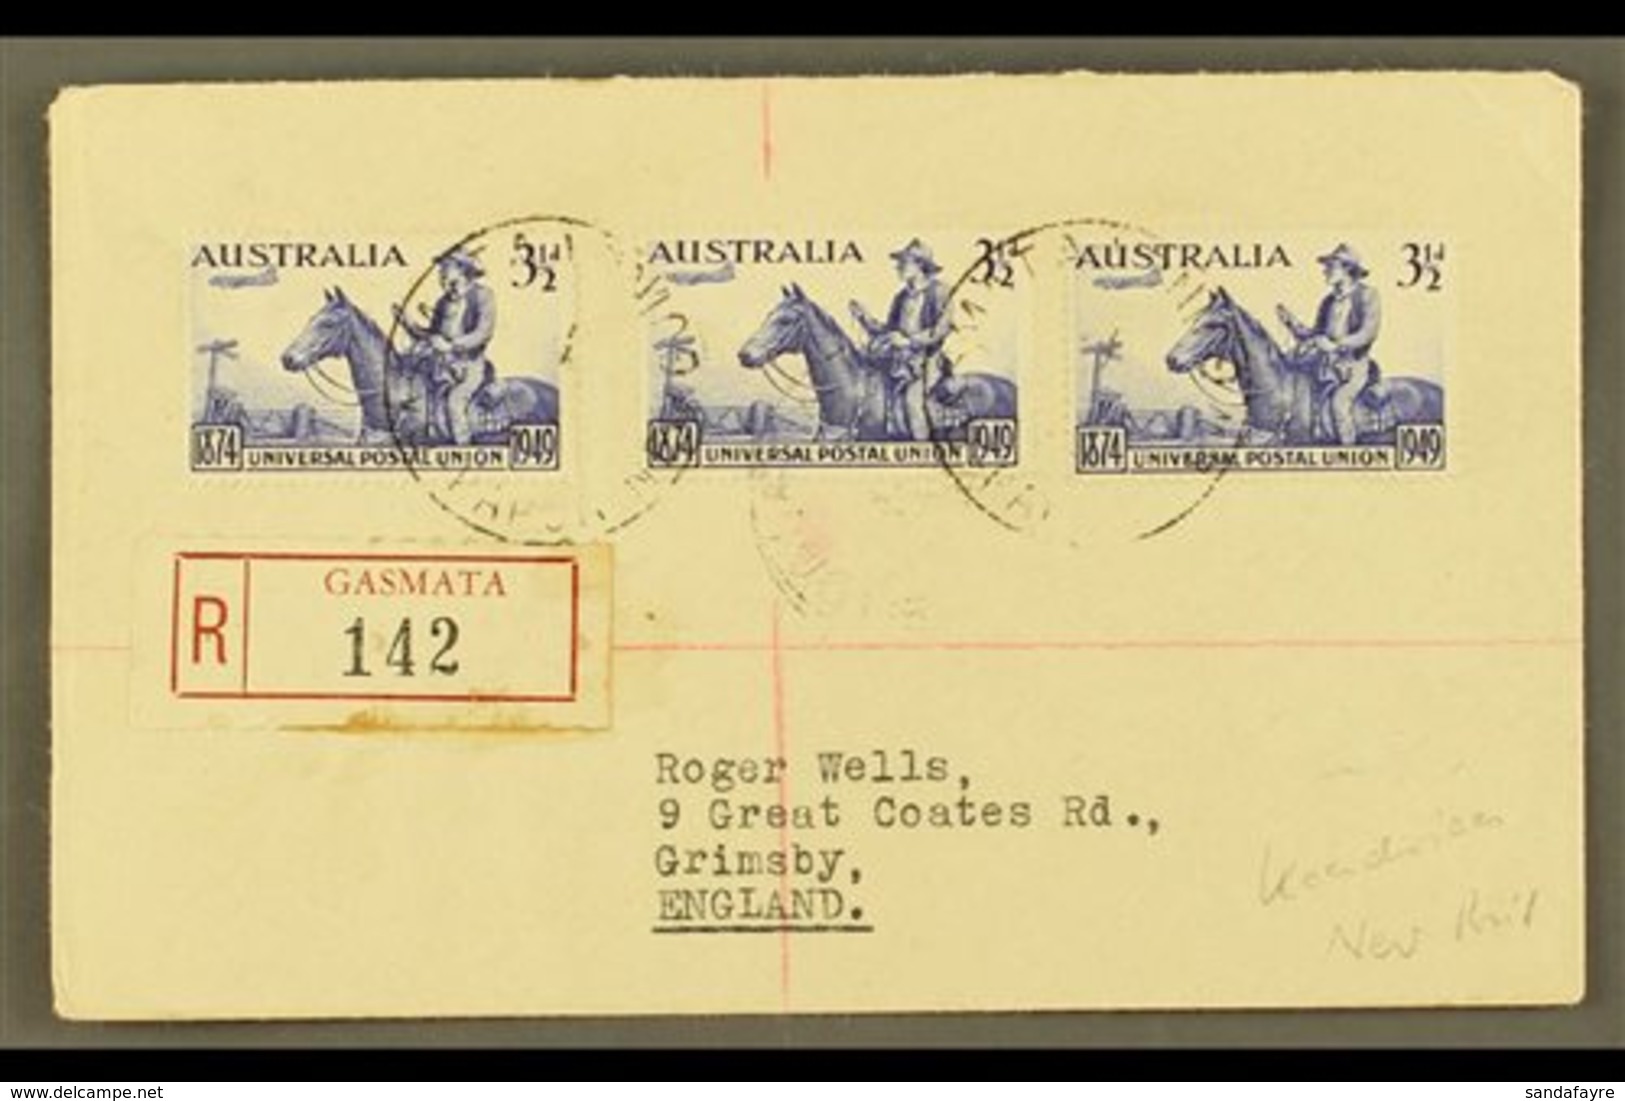 1950 (May) Neat "Roger Wells" Registered Cover To England, Bearing UPU 3½d X3, Tied GASMATA Cds's, Rabaul And Sydney Tra - Papua New Guinea